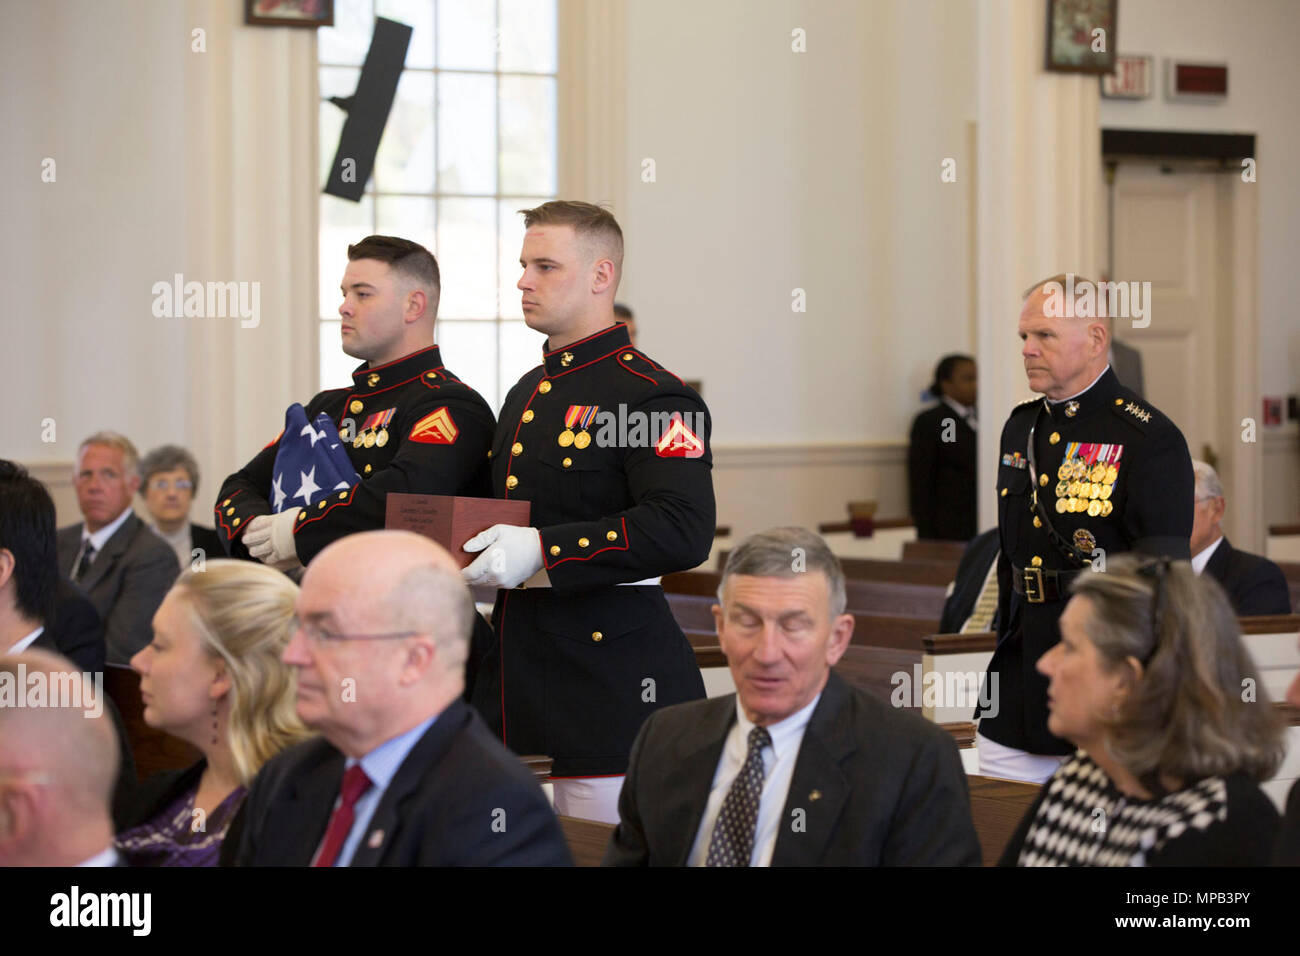 U.S. Marines with Marine Barracks Washington carry the remains of retired U.S. Marine Corps Lt. Gen. Lawrence F. Snowden during his Memorial Service at the U.S. Marine Memorial Chapel, Quantico, Va., April 8, 2017. Snowden retired in 1979 after nearly 40 years of service, fought in engagements during World War II, the Korean War, and Vietnam. He passed away Feb. 18, 2017. He was prominently known after retirement for organizing joint 'Reunion of Honor' missions which is an opportunity for Japanese and U.S. veterans and their families, dignitaries, leaders and service members from both nations  Stock Photo